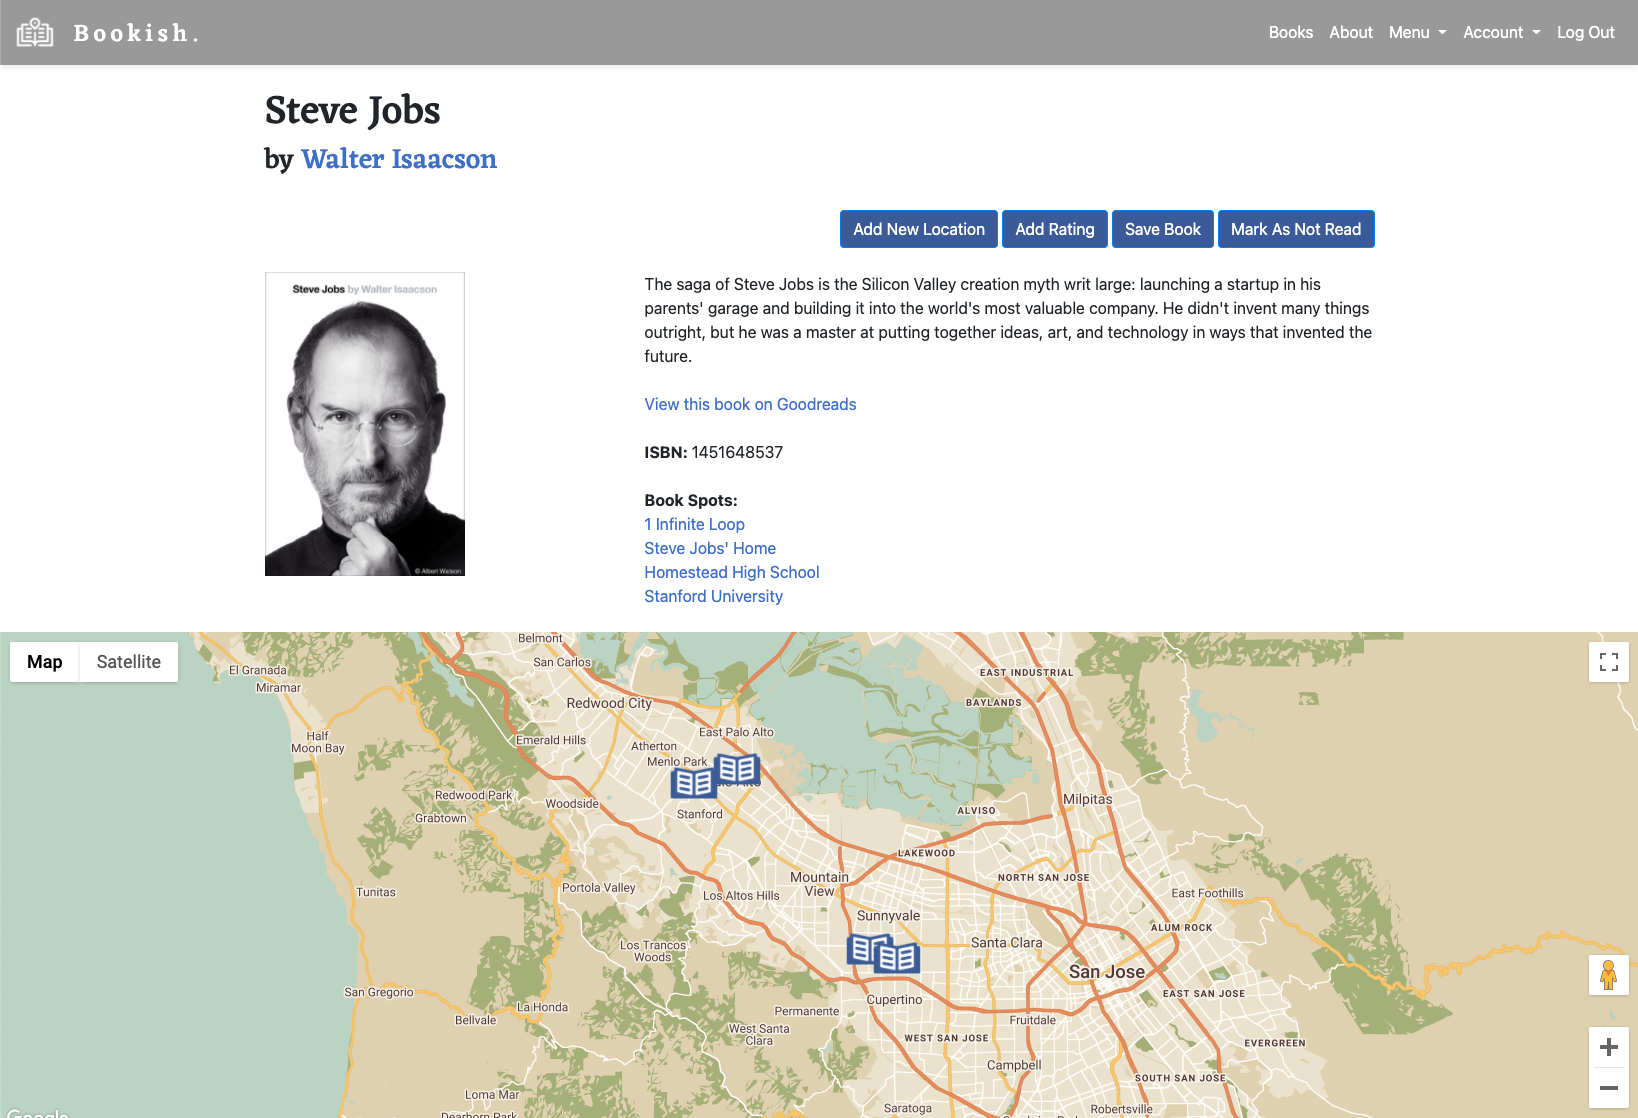 Book Details page for 'Steve Jobs' by Walter Isaacson